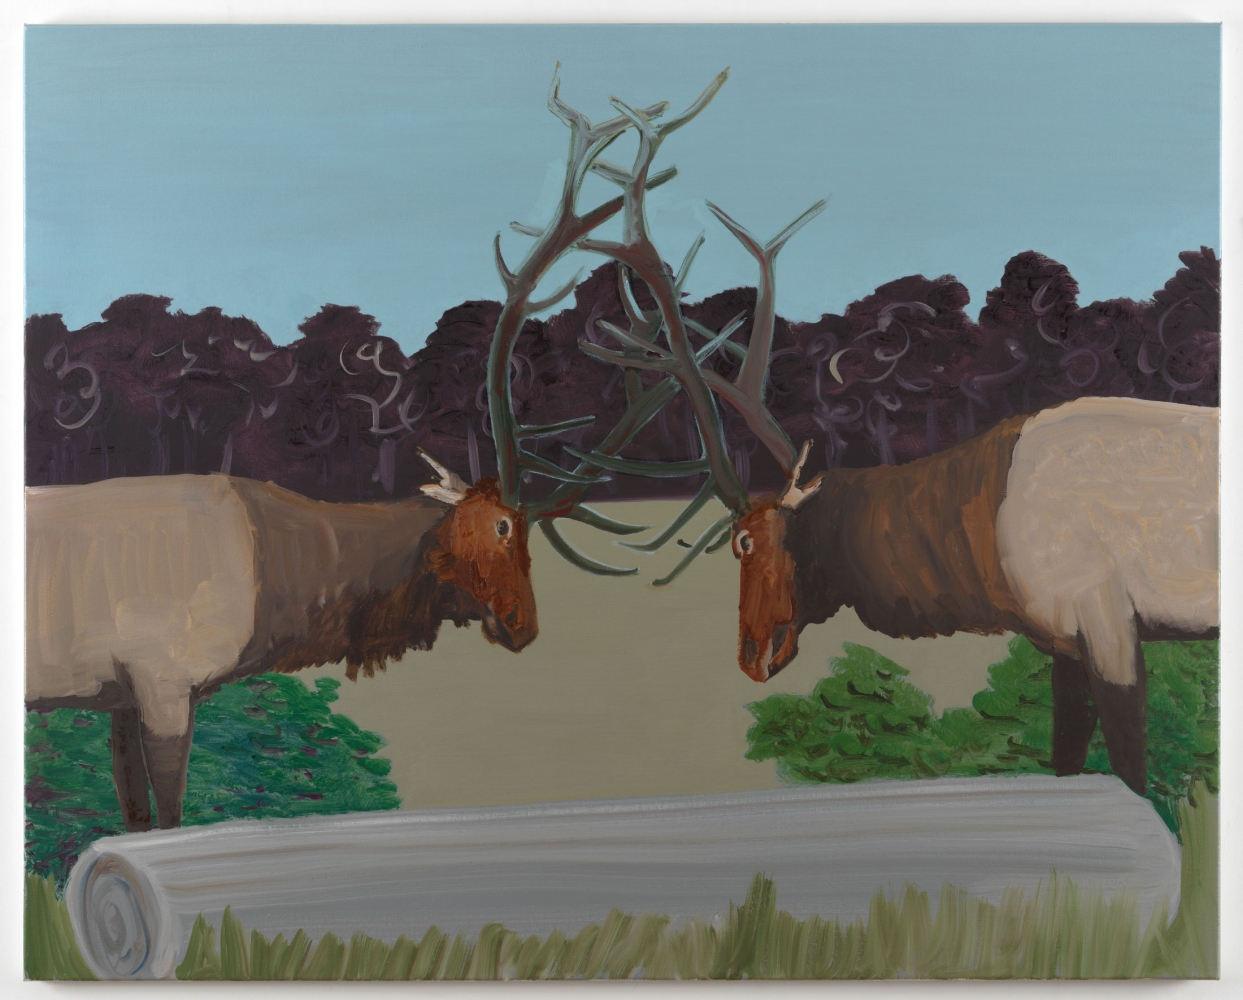 Emo Verkerk
Two American Elks, 2020
Groundcolor and oil on cotton
47 1/4 x 59 1/8 inches
(120 x 150 cm)